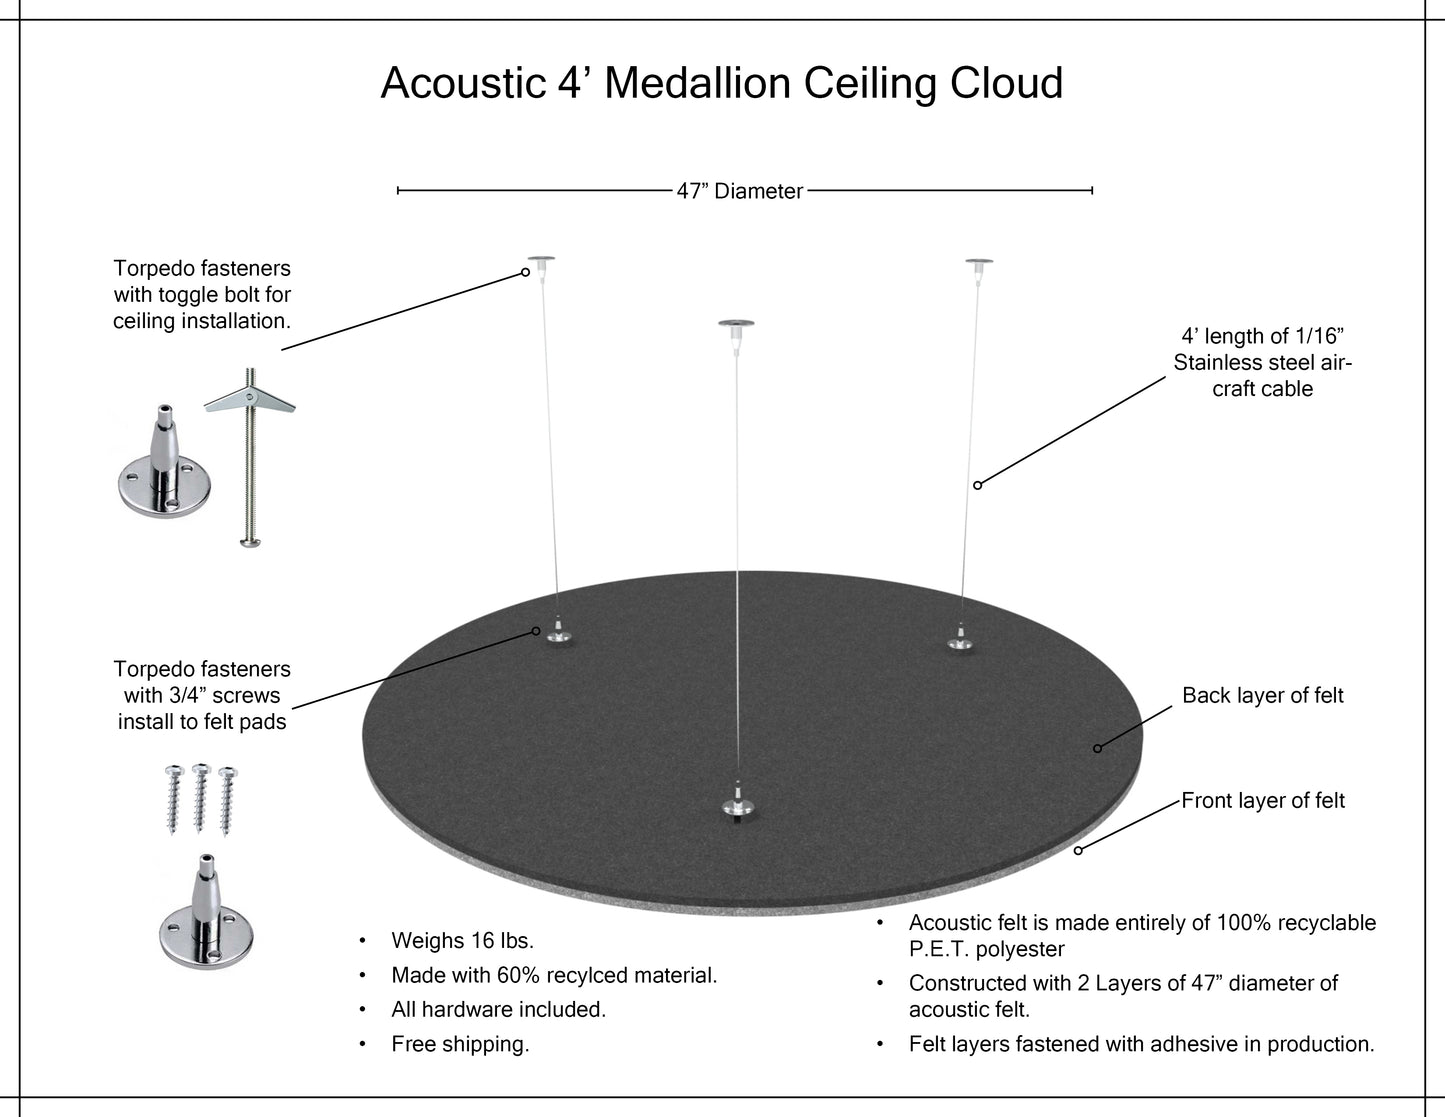 Medallion Acoustic Ceiling Cloud - All Dressed Up